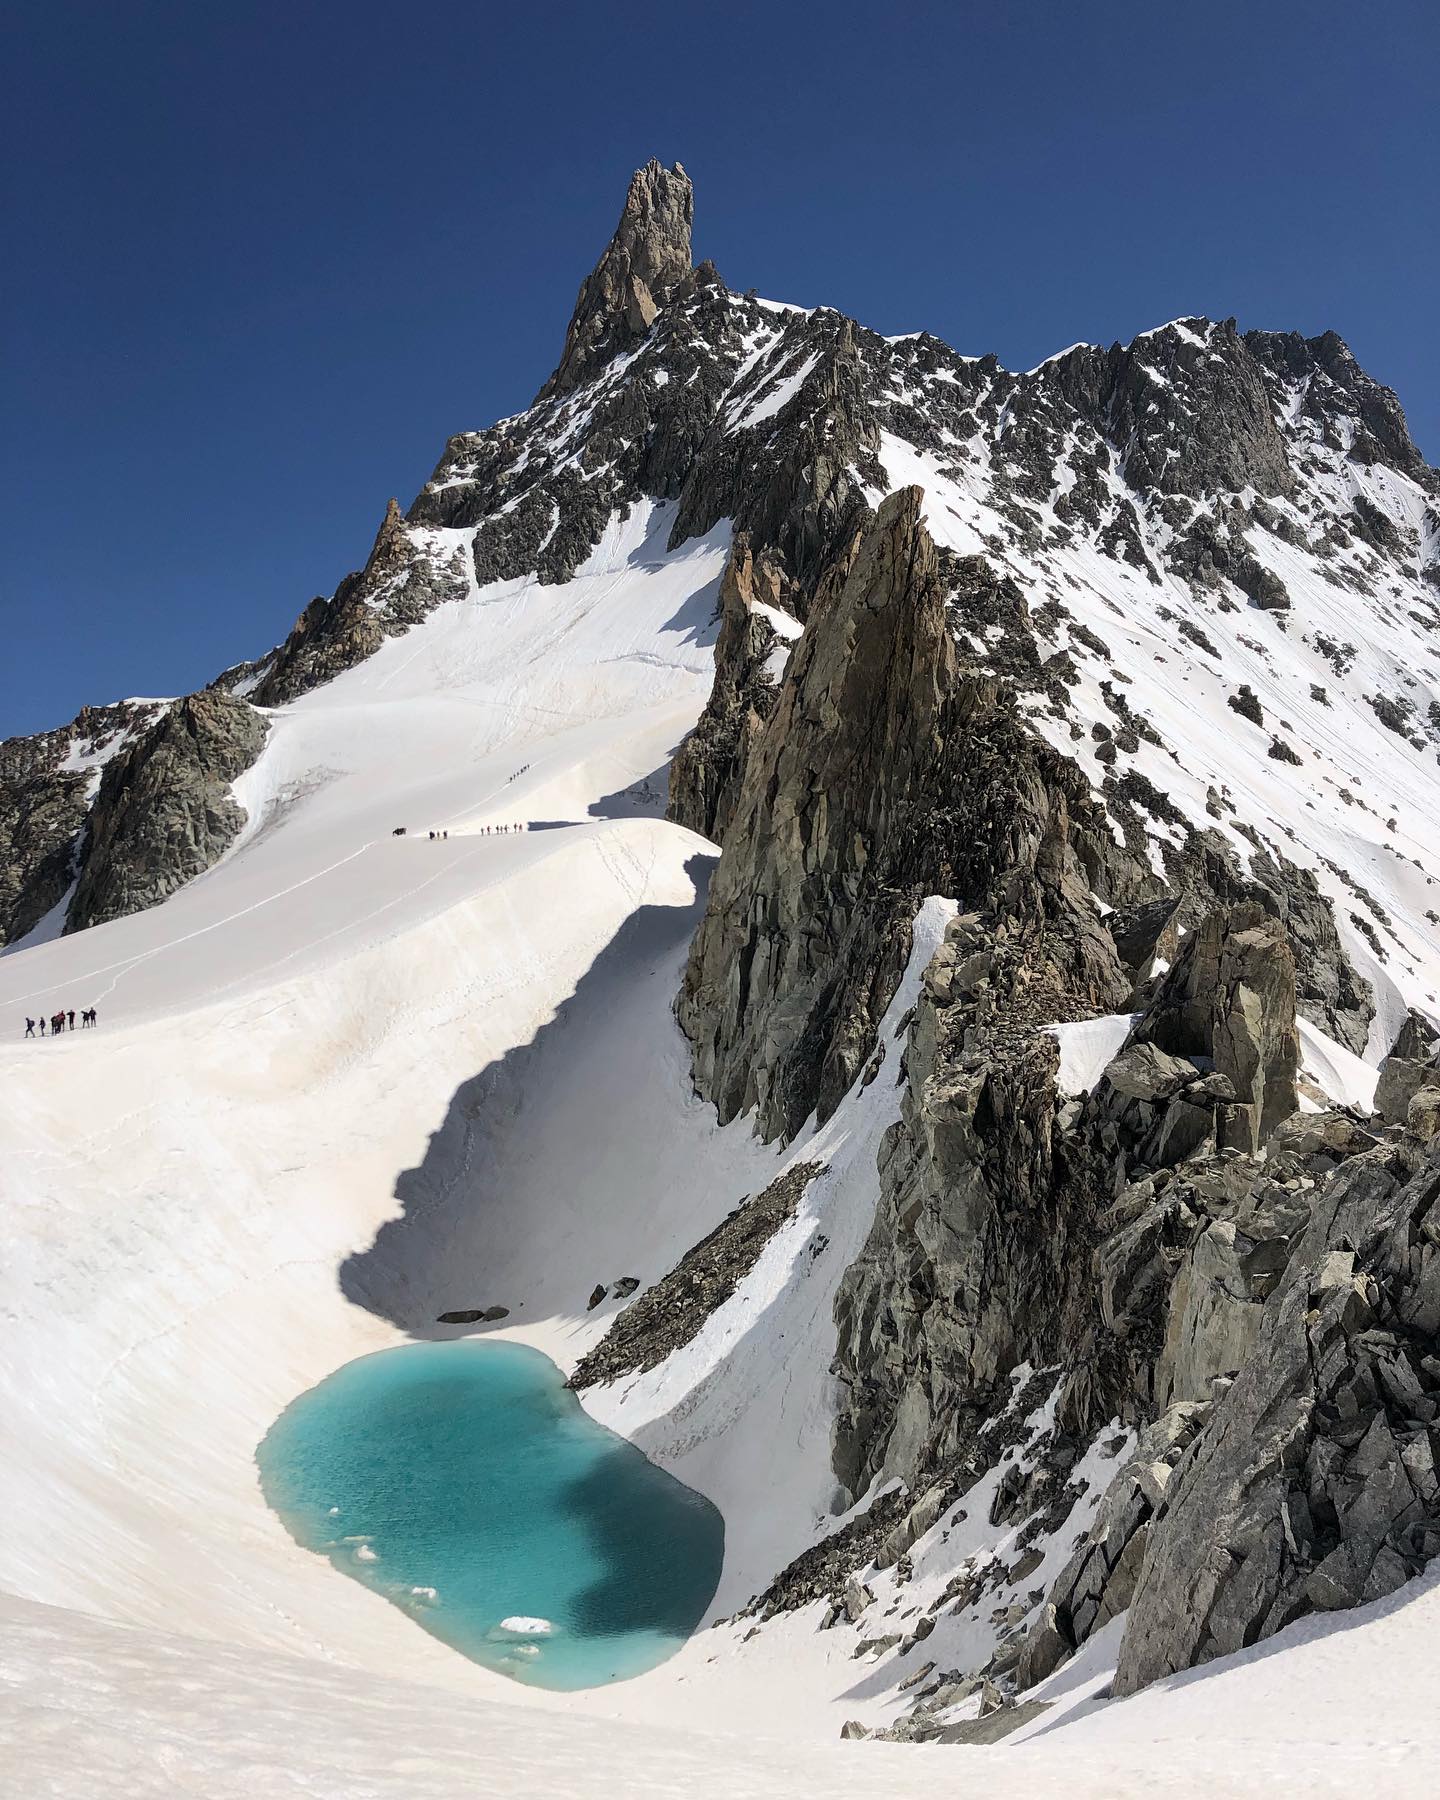 Guide du Mont Blanc Gianlucca Marra witnessed the 'ephemeral lake' by the Dent de Géant. Montagna Sicura. An ‘ephemeral lake’ appeared on the Mont Blanc massif due to warm record temperatures.